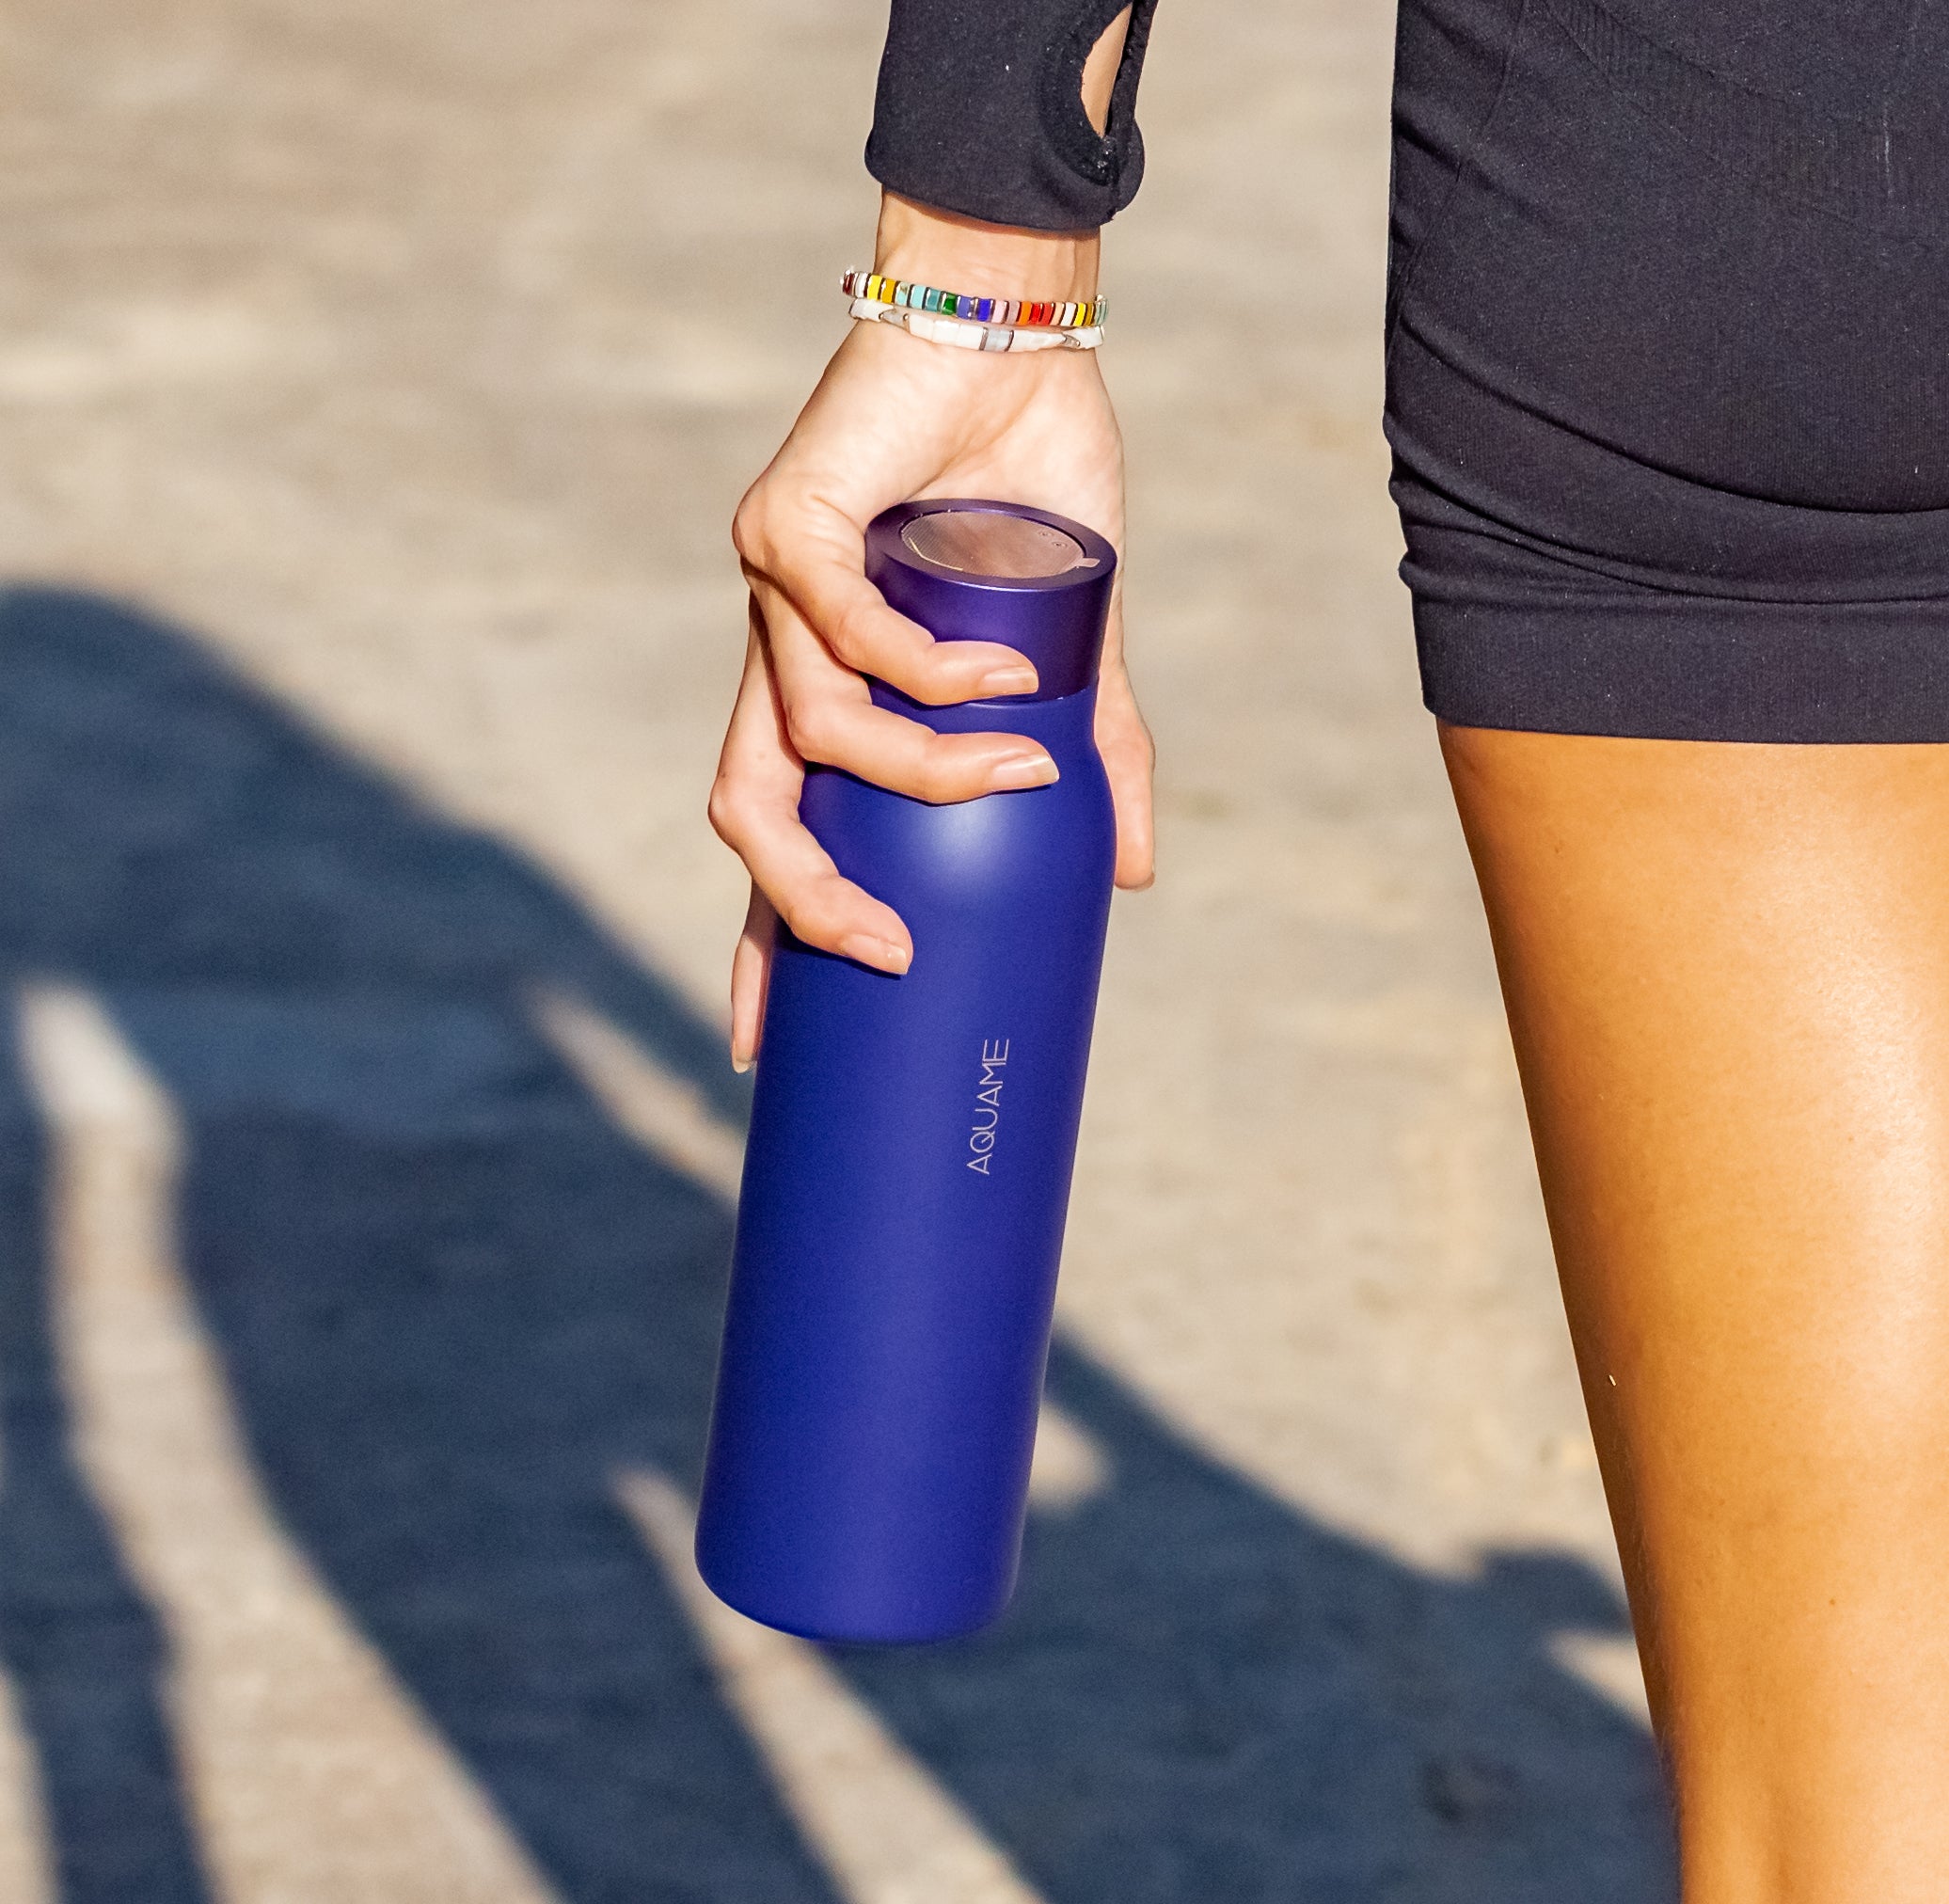 AQUAME 1.0 Smart Water Bottle Cosmo Blue